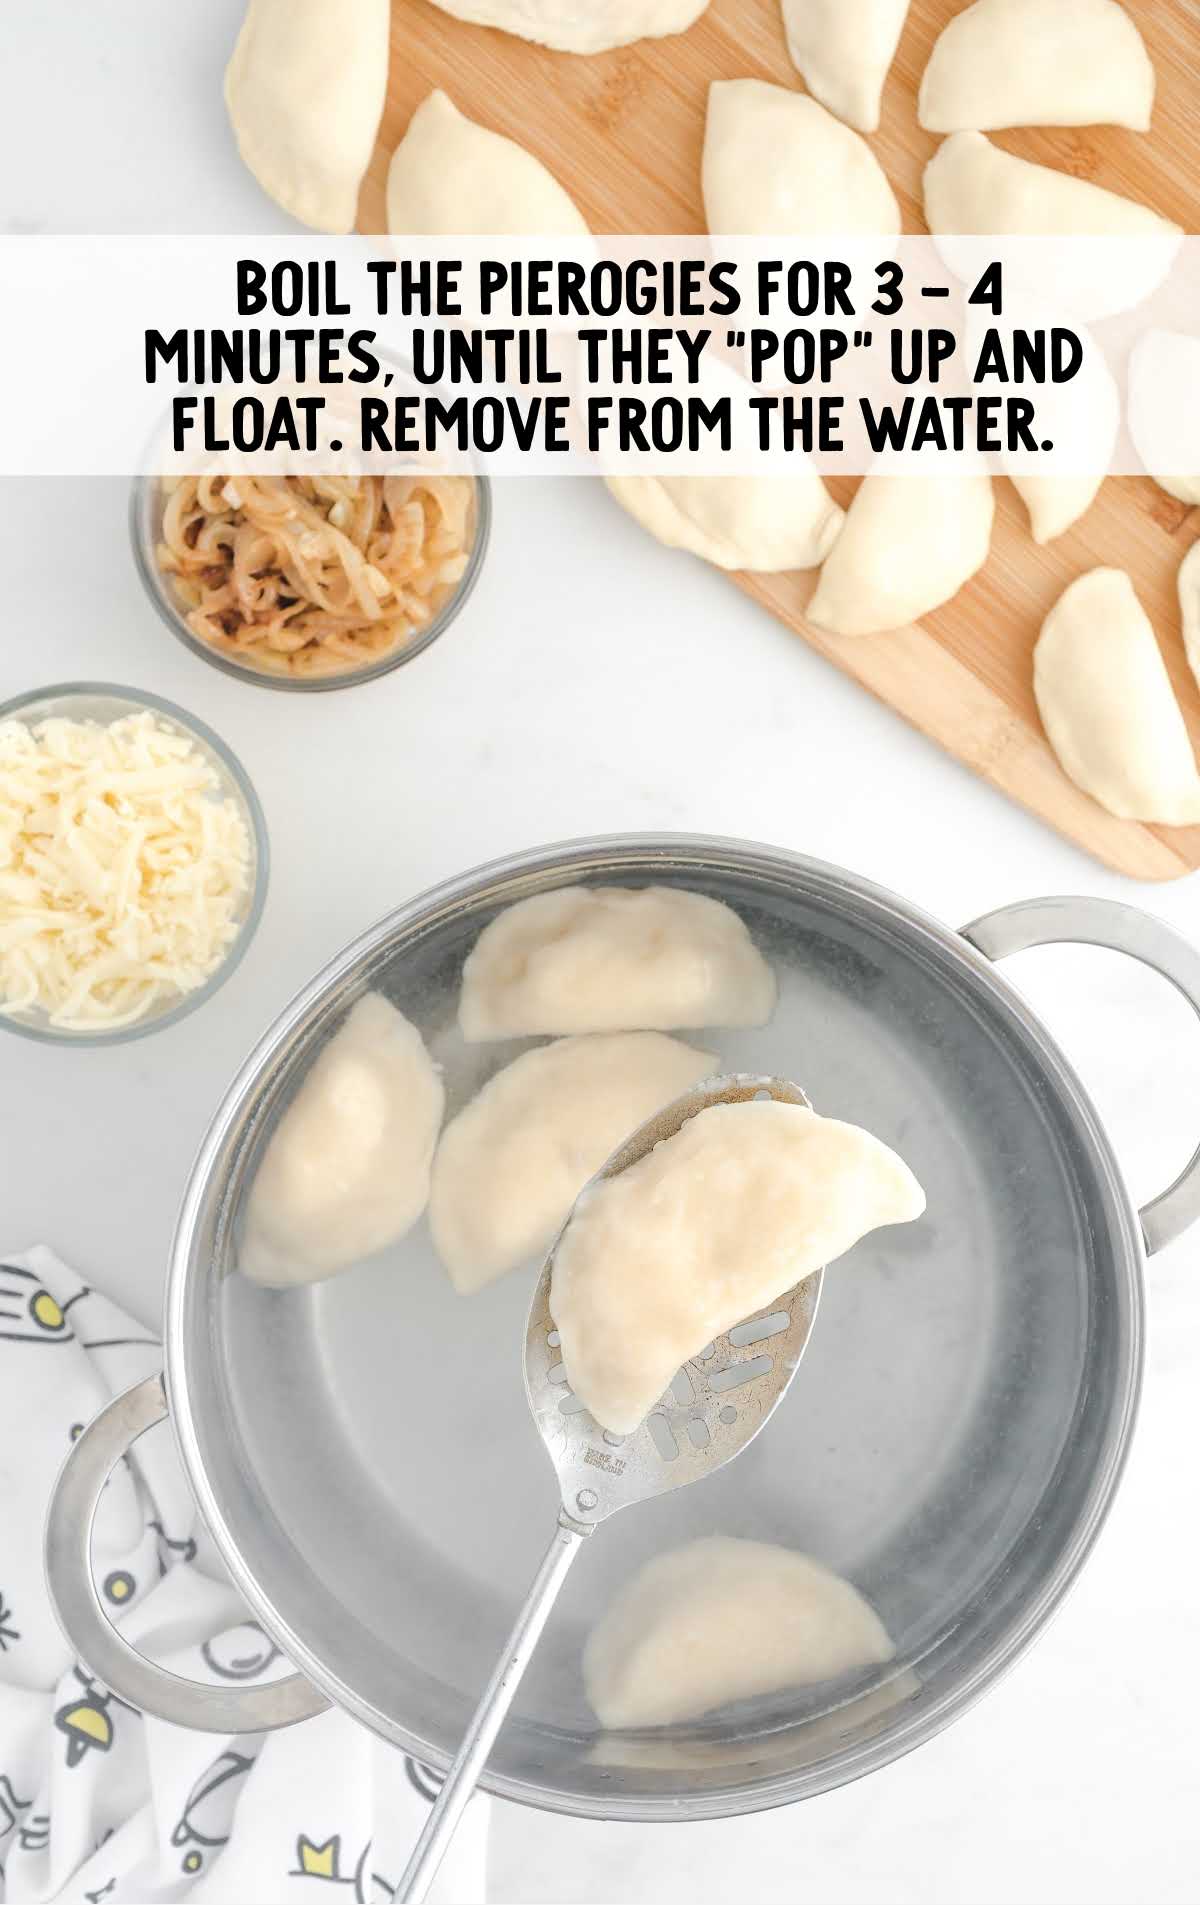 Pierogi placed in boiled water in a pot